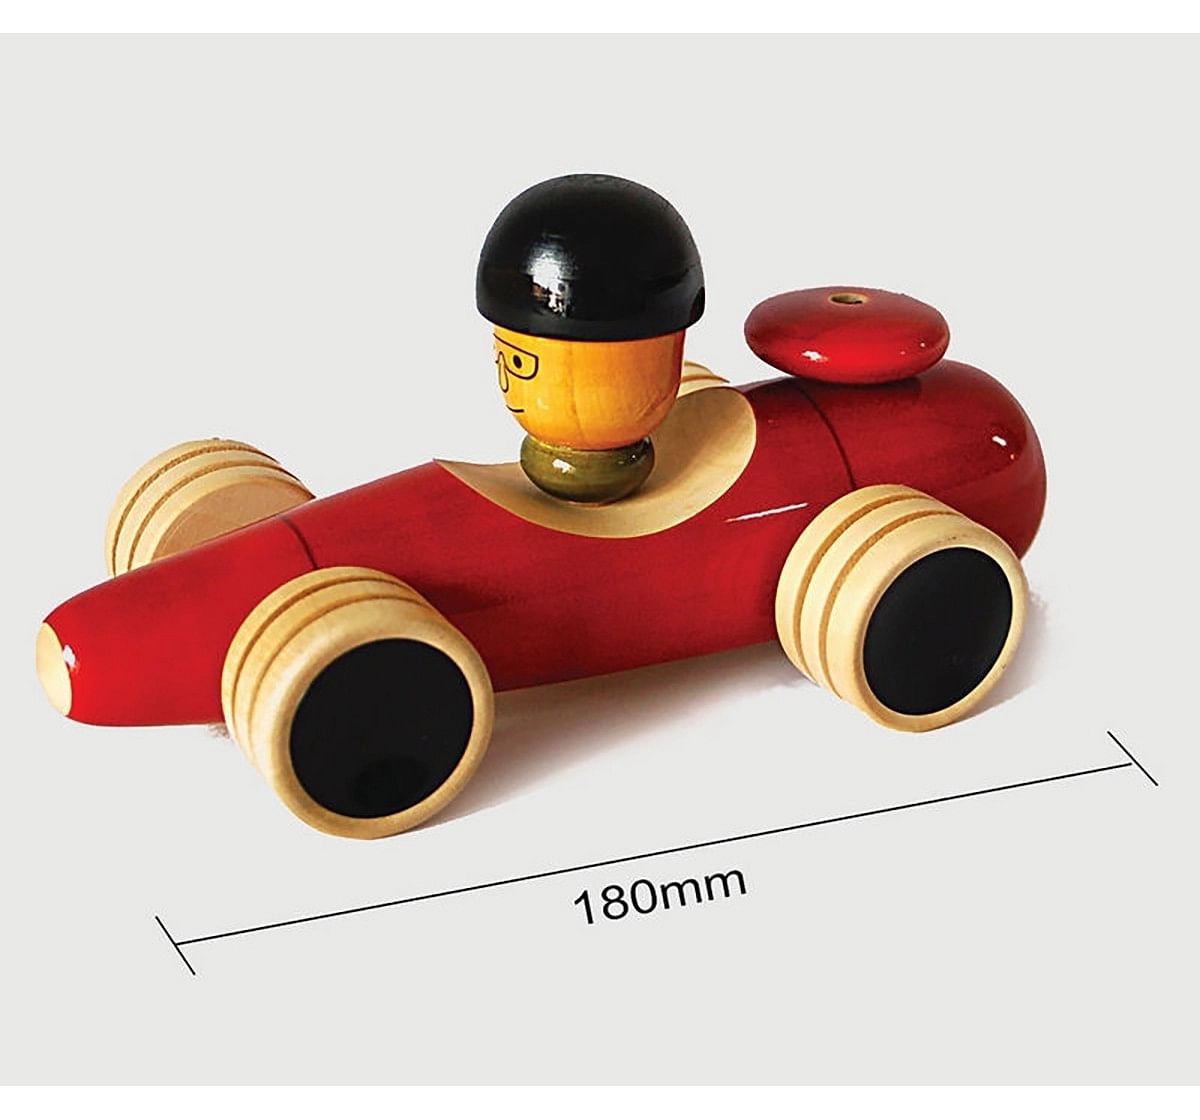 Fairkraft Creations Handmade Wooden Vroom Toy 1 Wooden Toys for Kids age 1Y+ (Red)